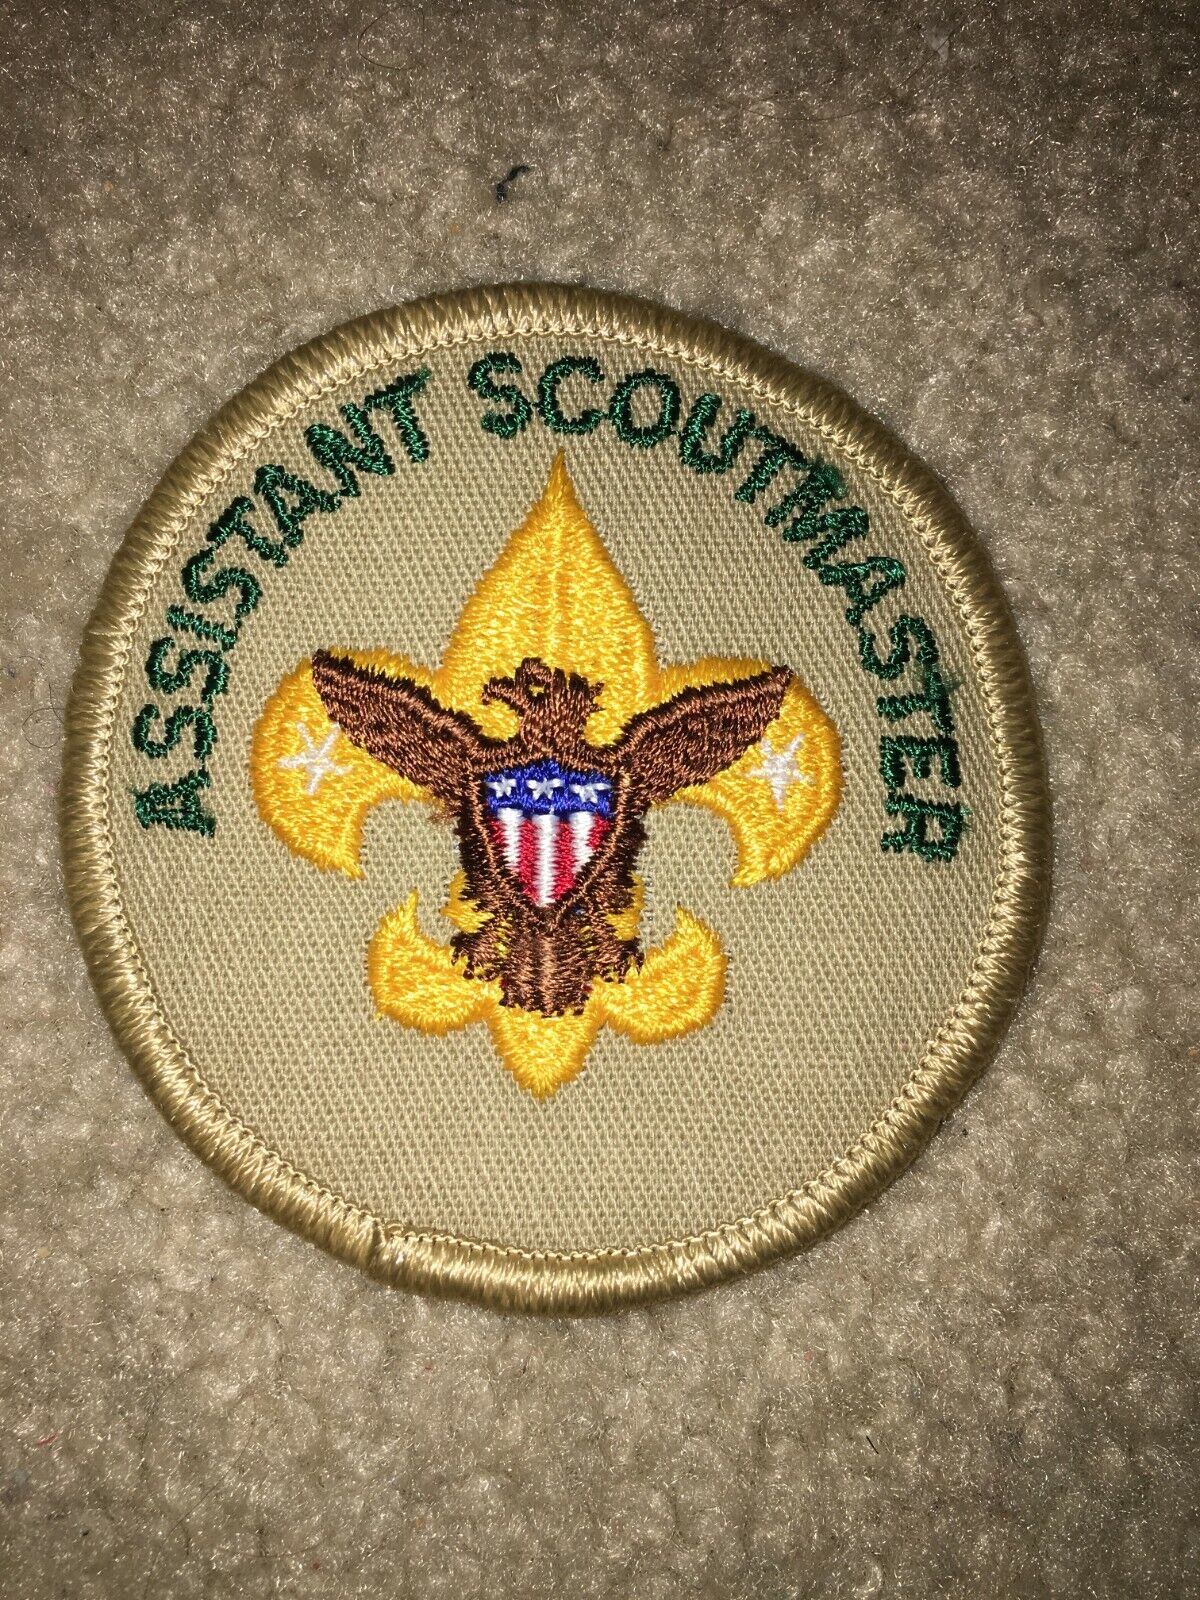 Boy Scout Adult Assistant Scoutmaster 1989 - Current Tan Uniform PreOwned Patch